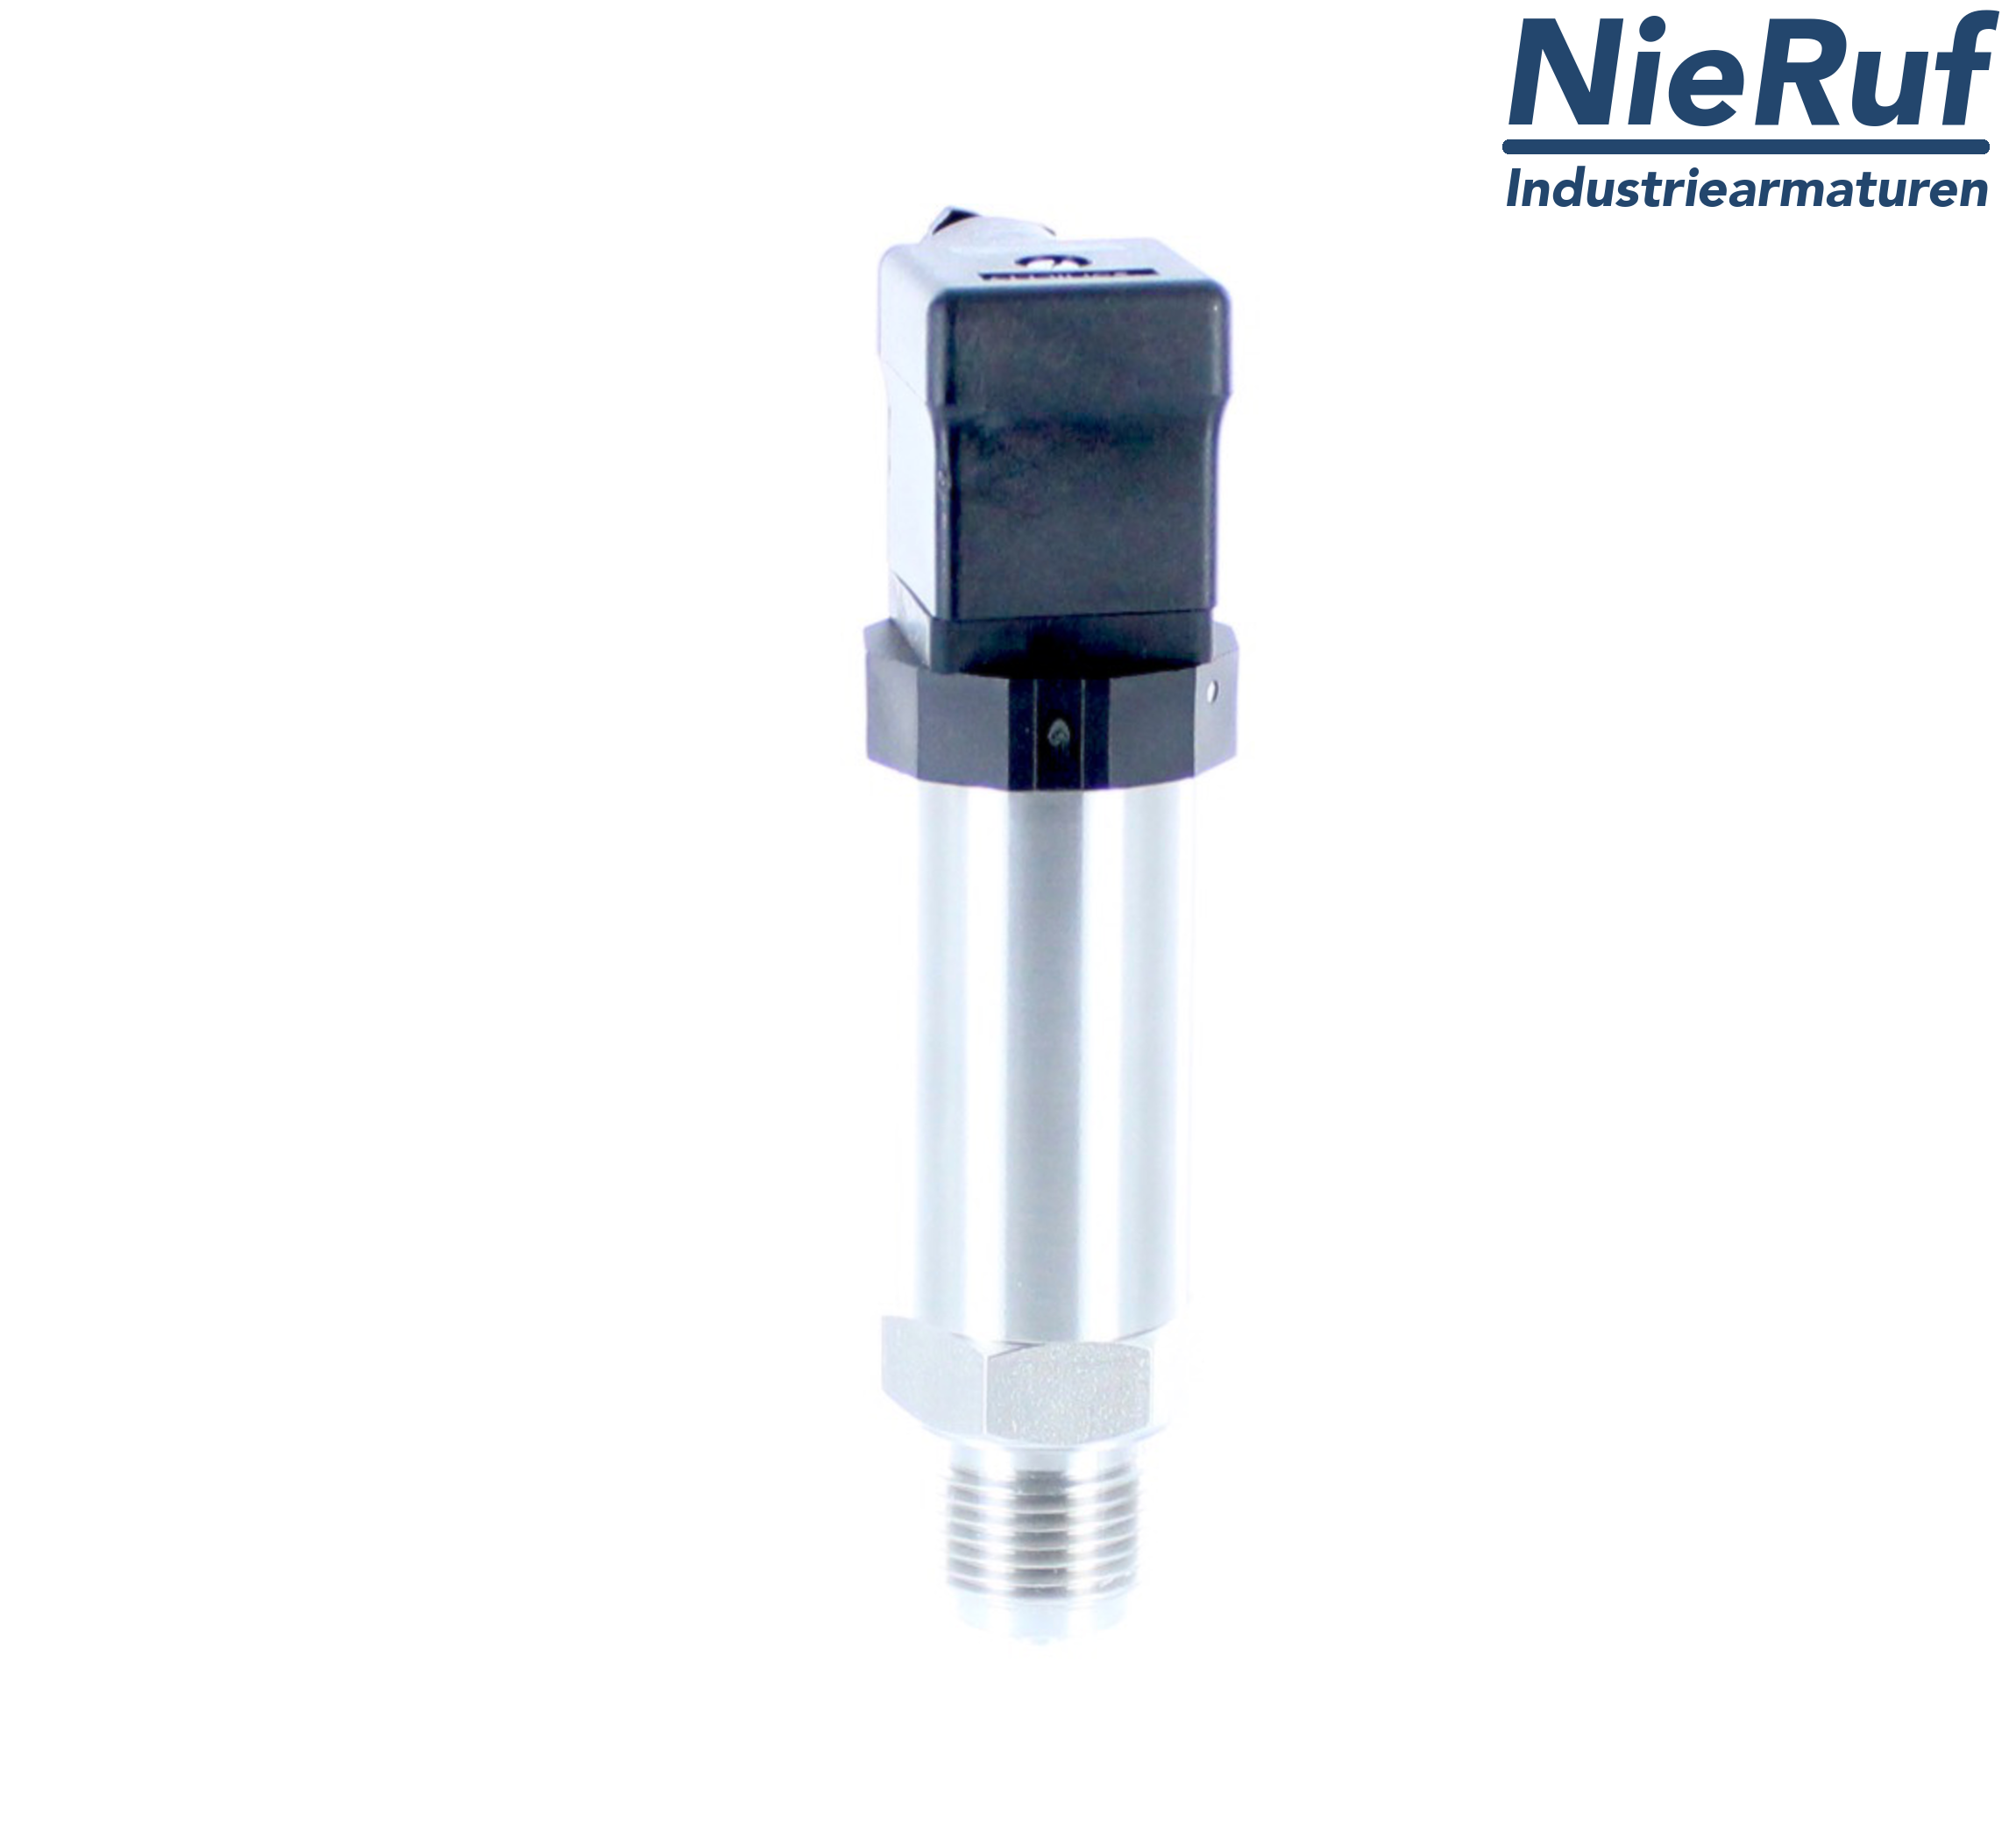 pressure sensor G 1/4" B DS01 stainless steel 2-wire: 4-20mA FPM 0,0 - 1,0 bar